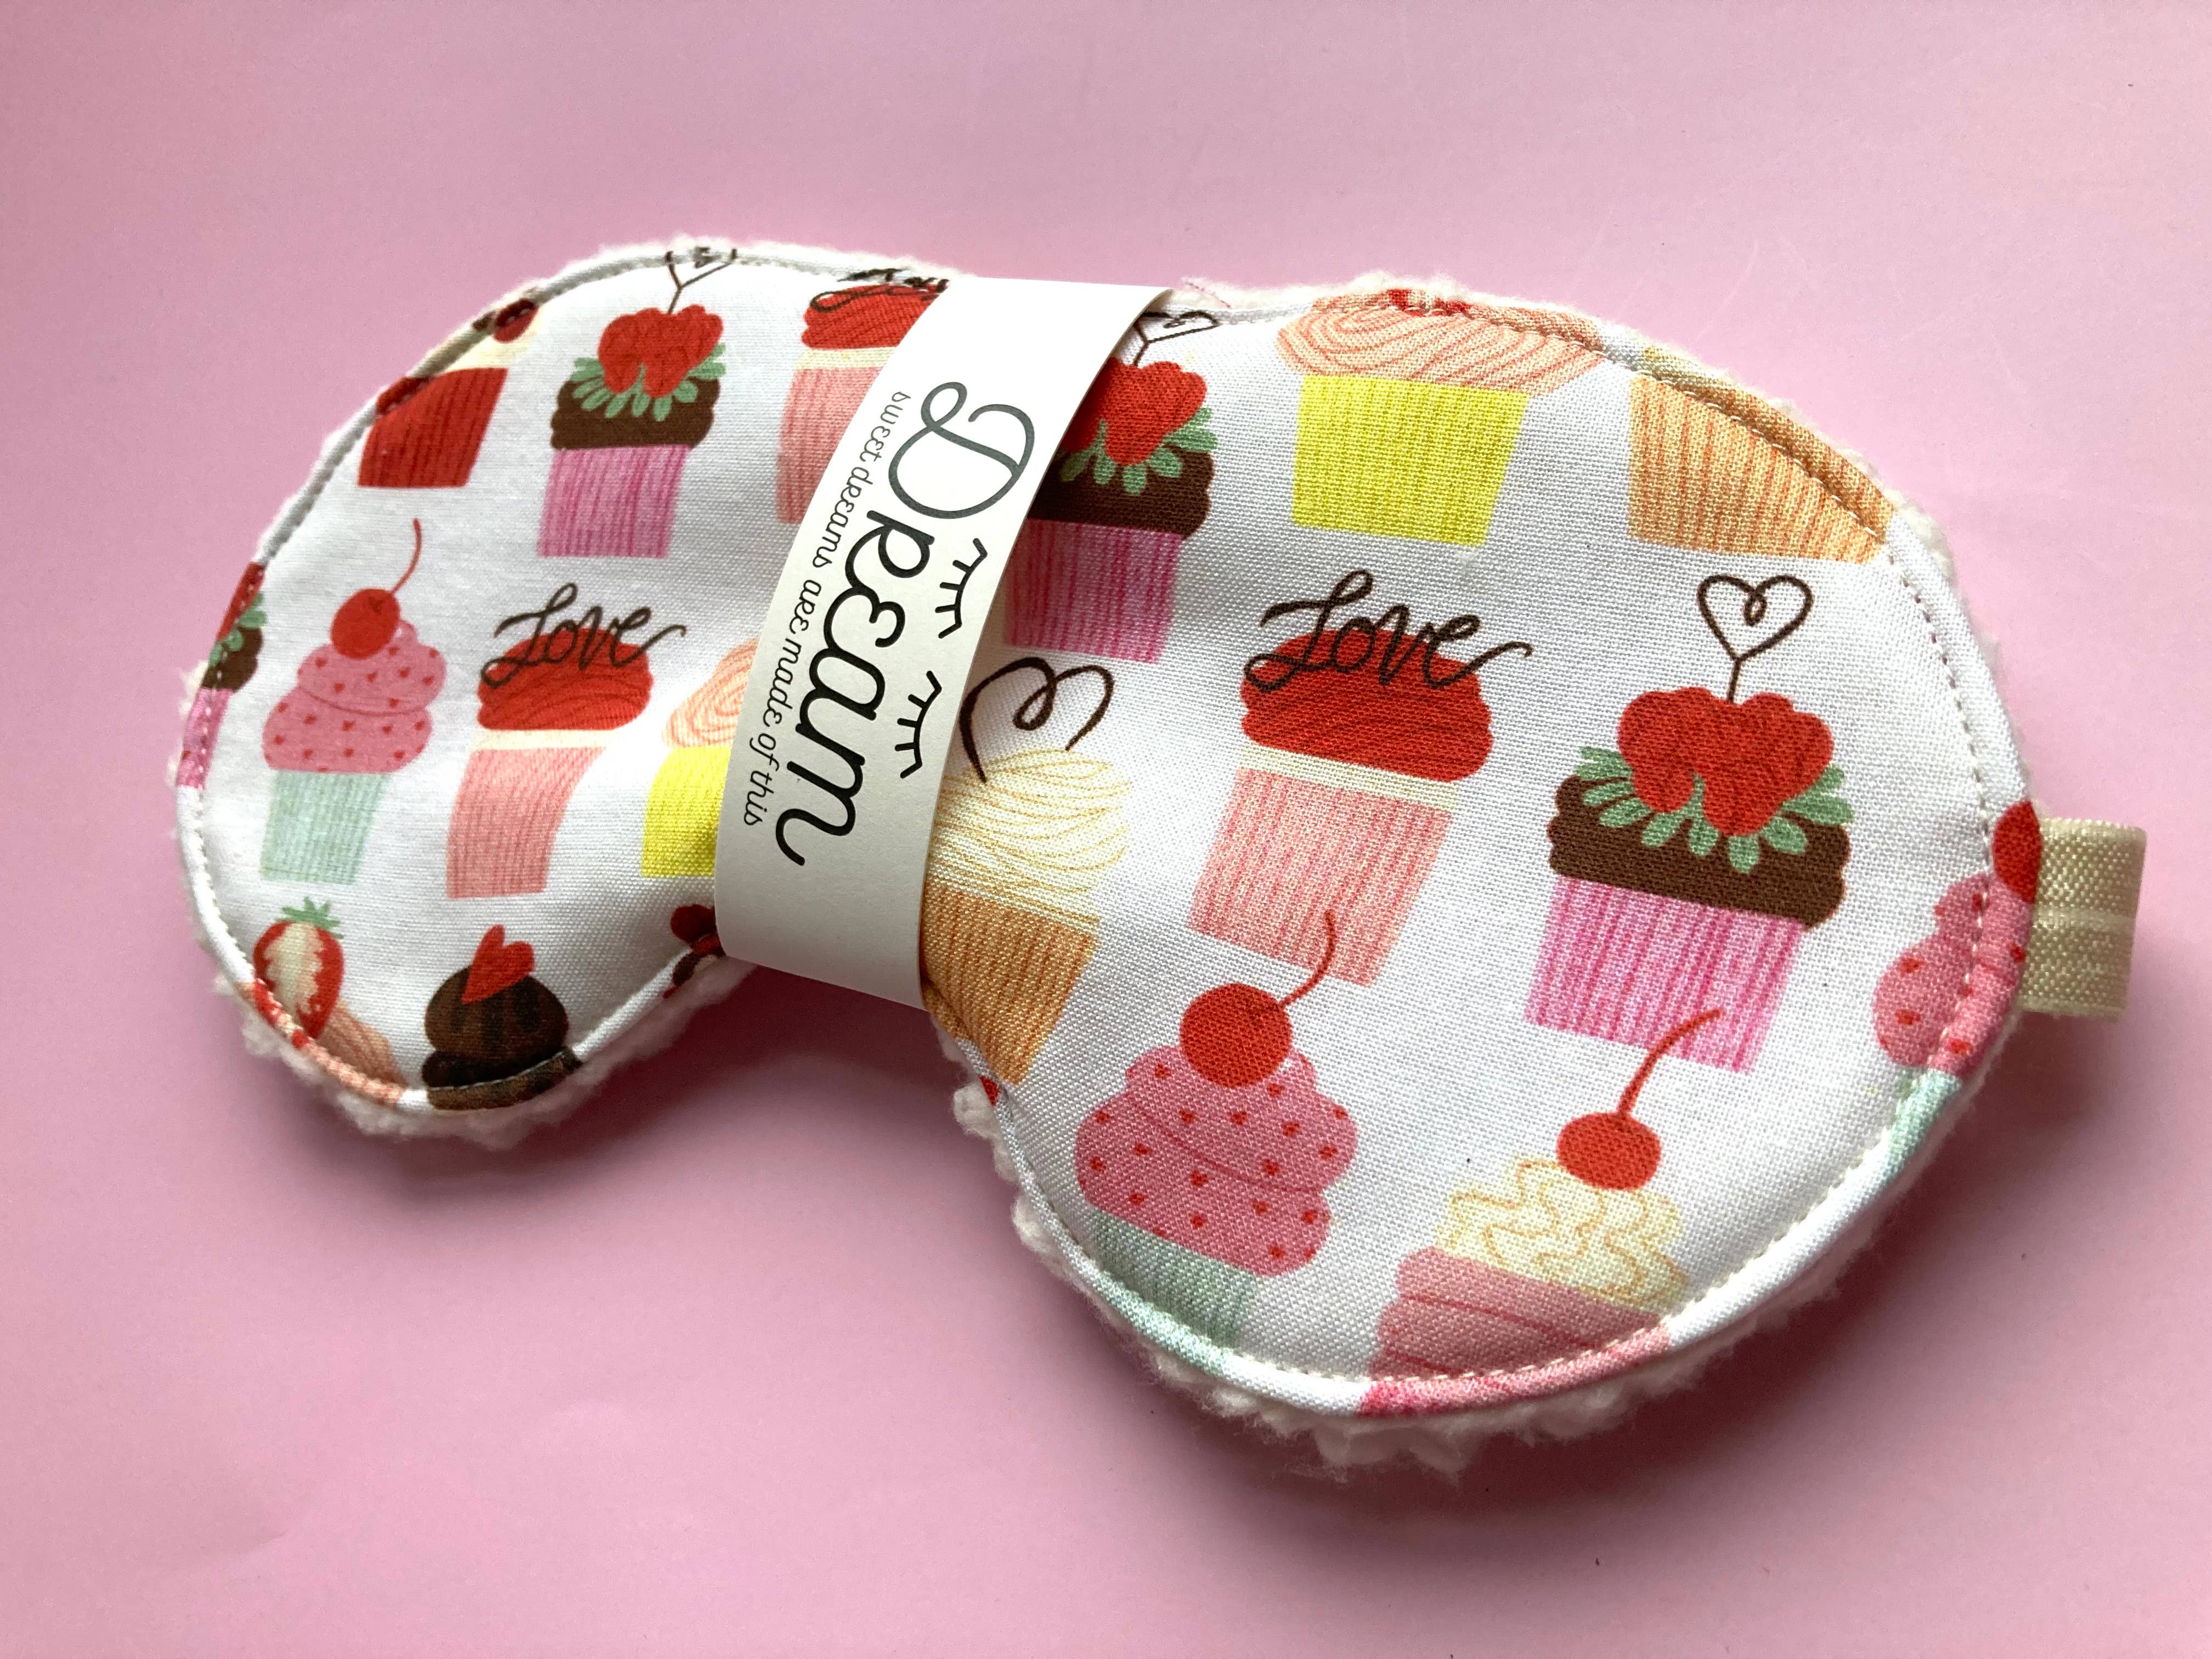 A Cupcake Sleep Mask by Little Man with a pattern of various cupcakes and the word "love" printed on it, infused with wild nurturer aromatherapy essential oil, displayed on a pink background.